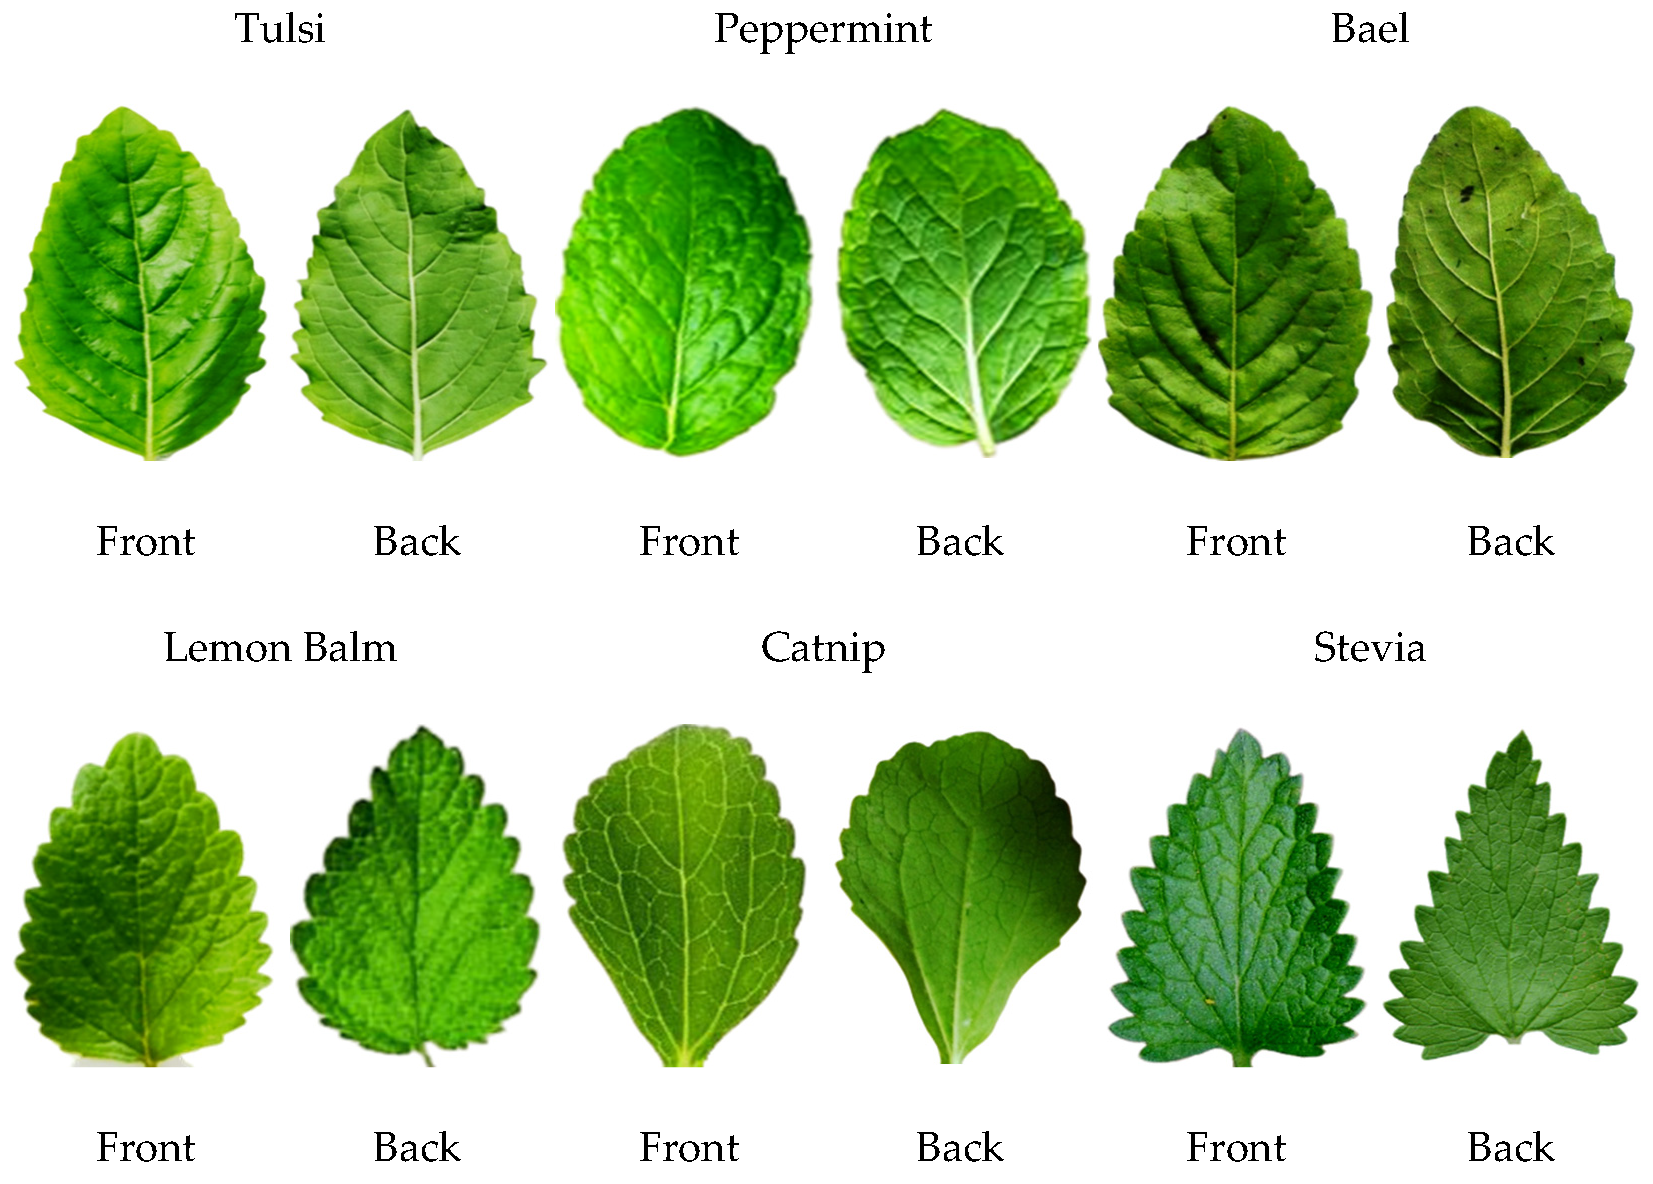 Agronomy Free Full Text The Classification Of Medicinal Plant Leaves Based On Multispectral And Texture Feature Using Machine Learning Approach